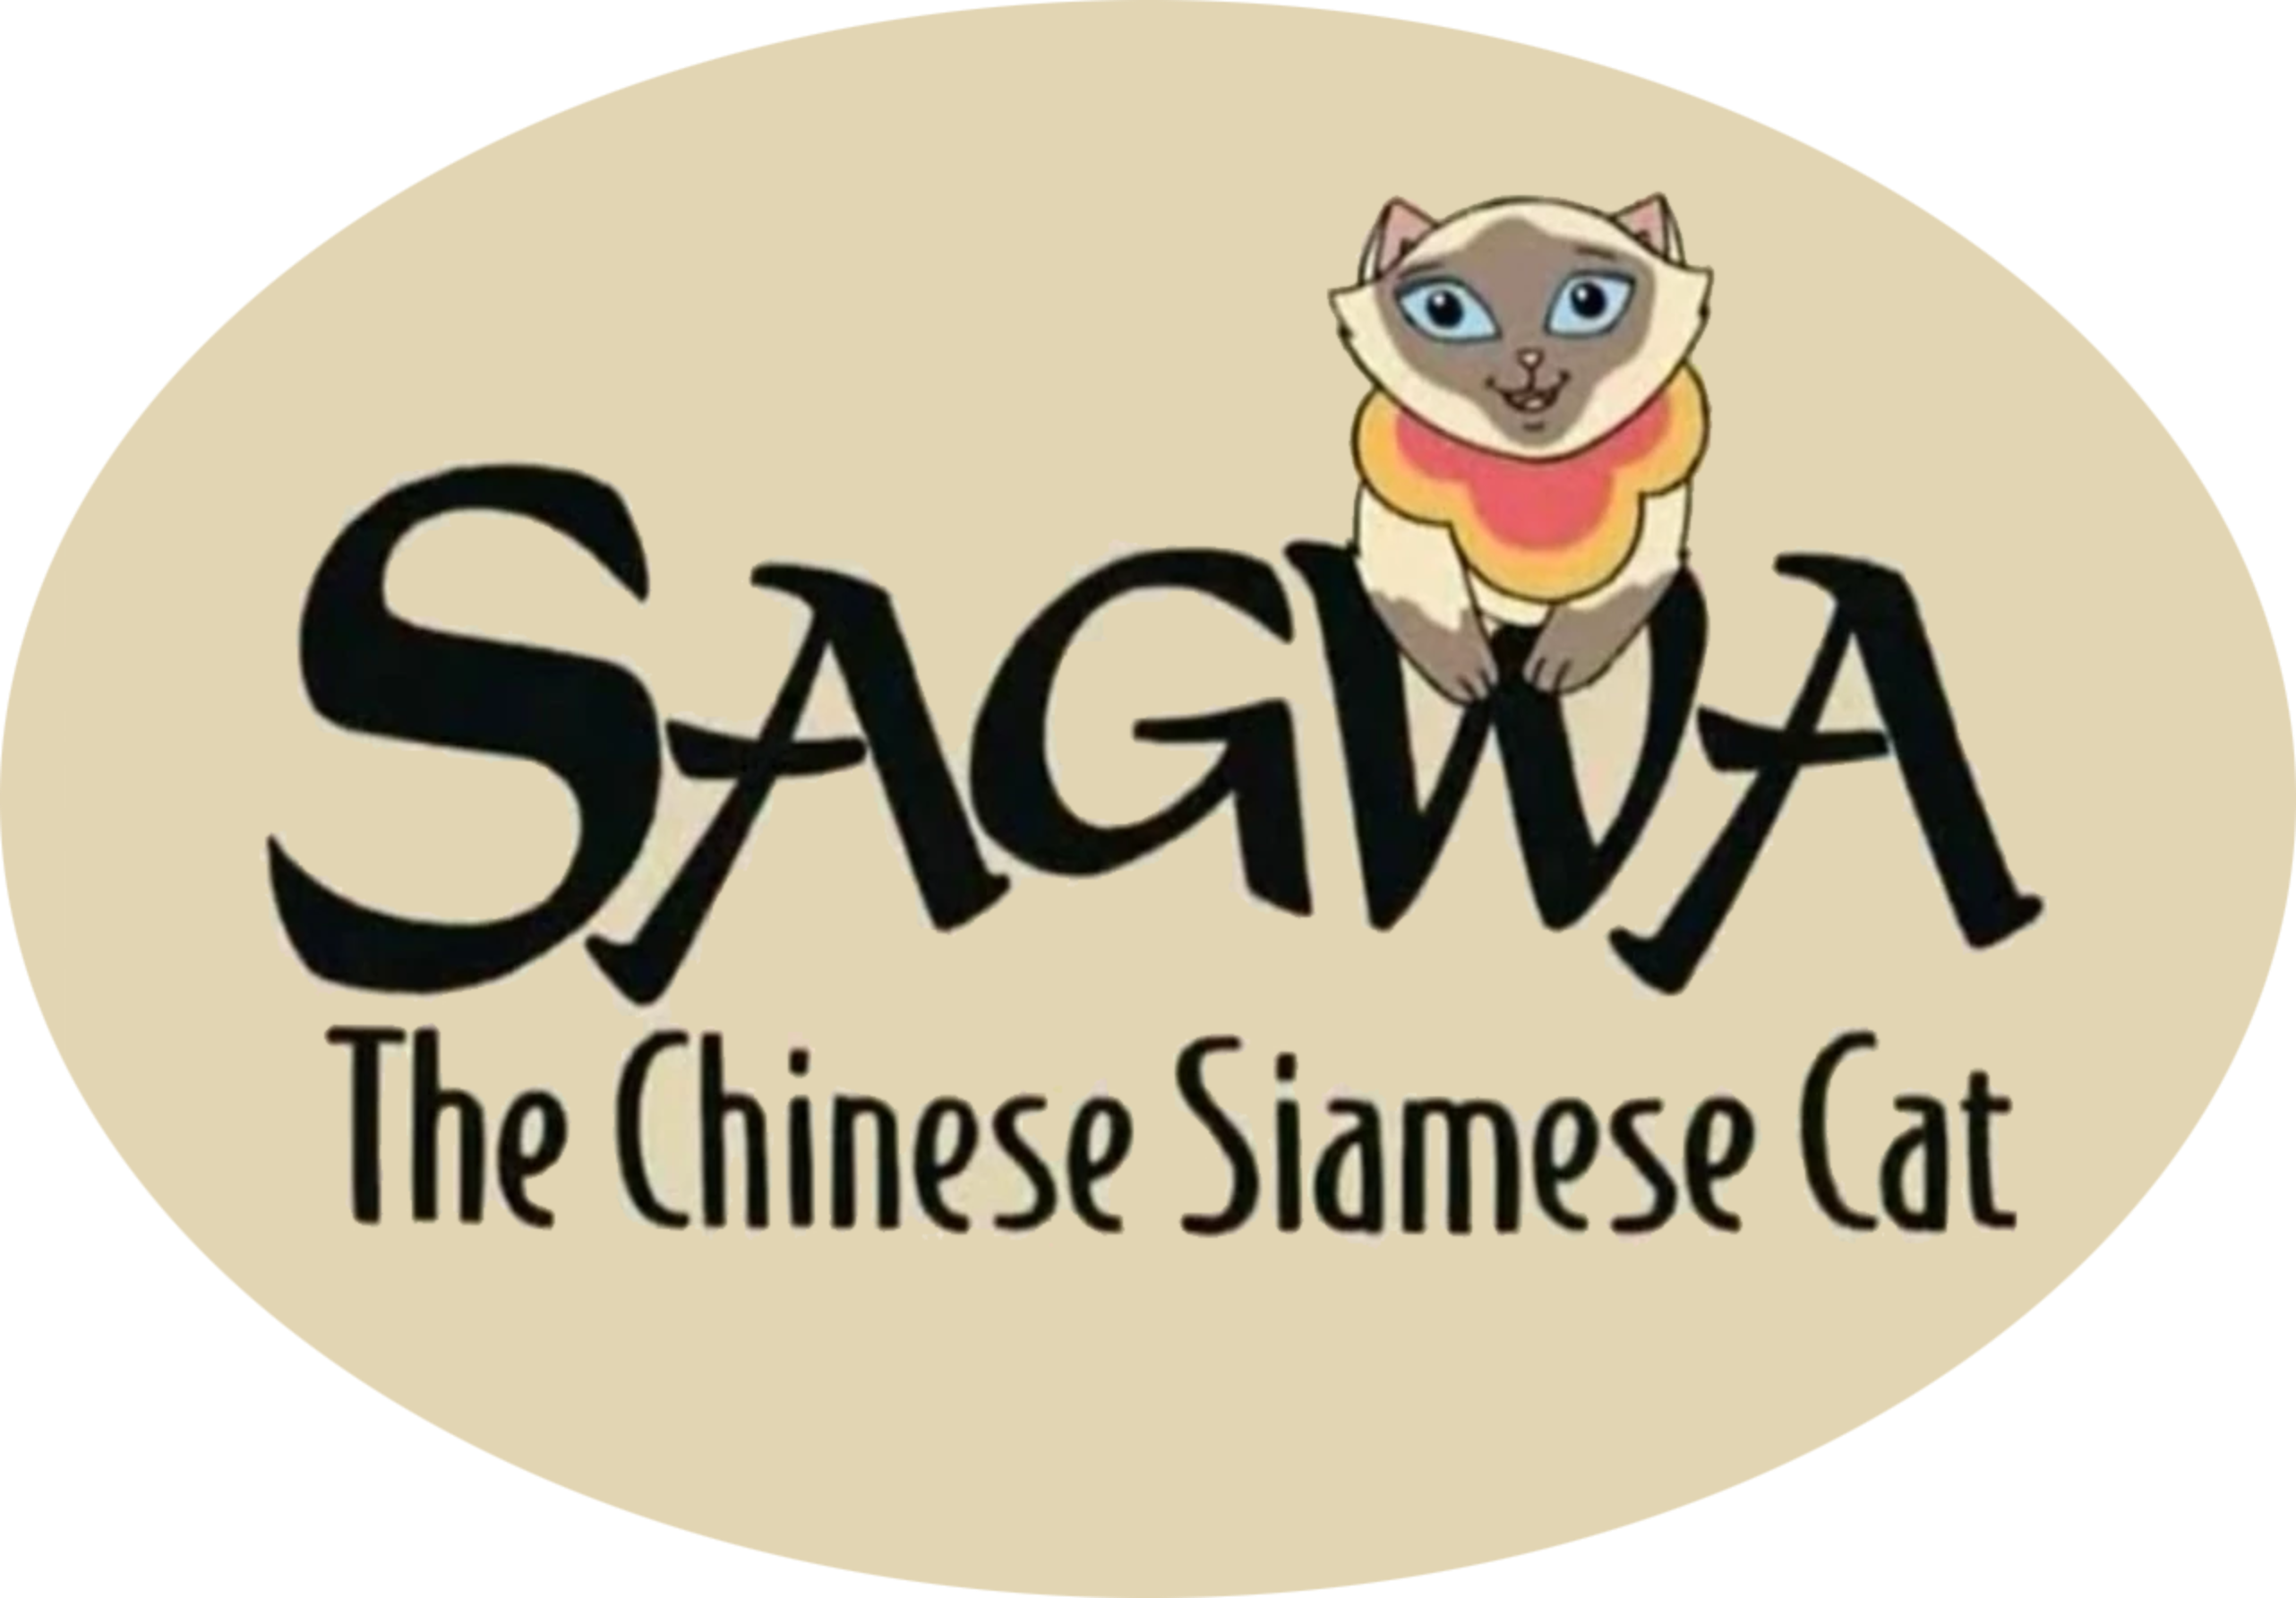 Sagwa, the Chinese Siamese Cat Complete (4 DVDs Box Set)